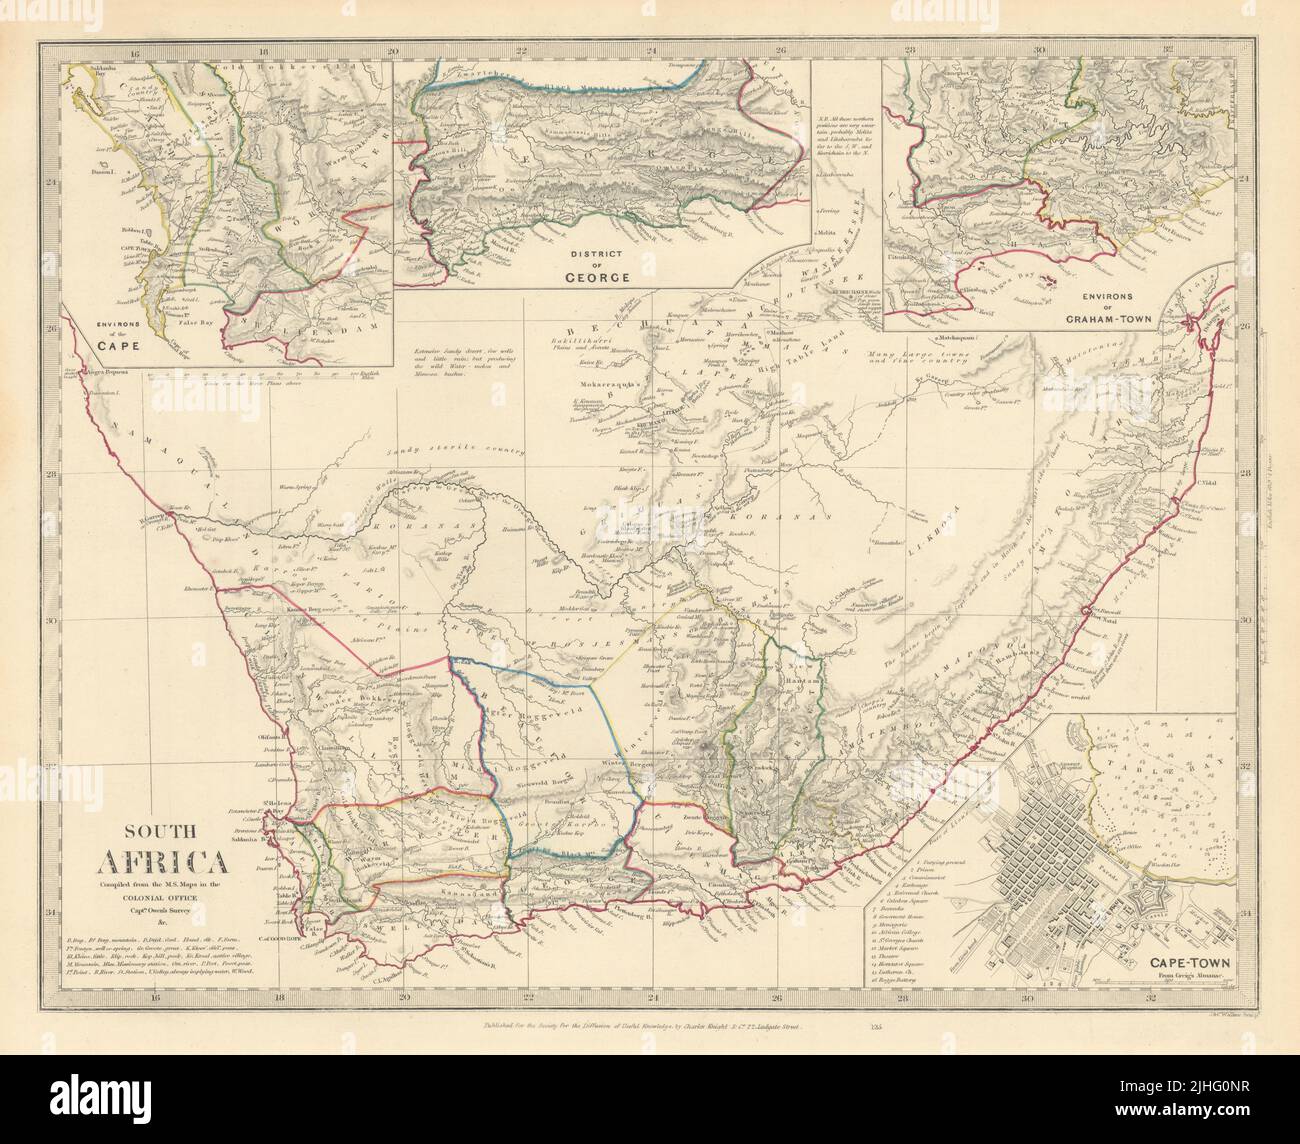 SOUTH AFRICA. Cape Town plan. Graham Town. District of George. SDUK 1851 map Stock Photo